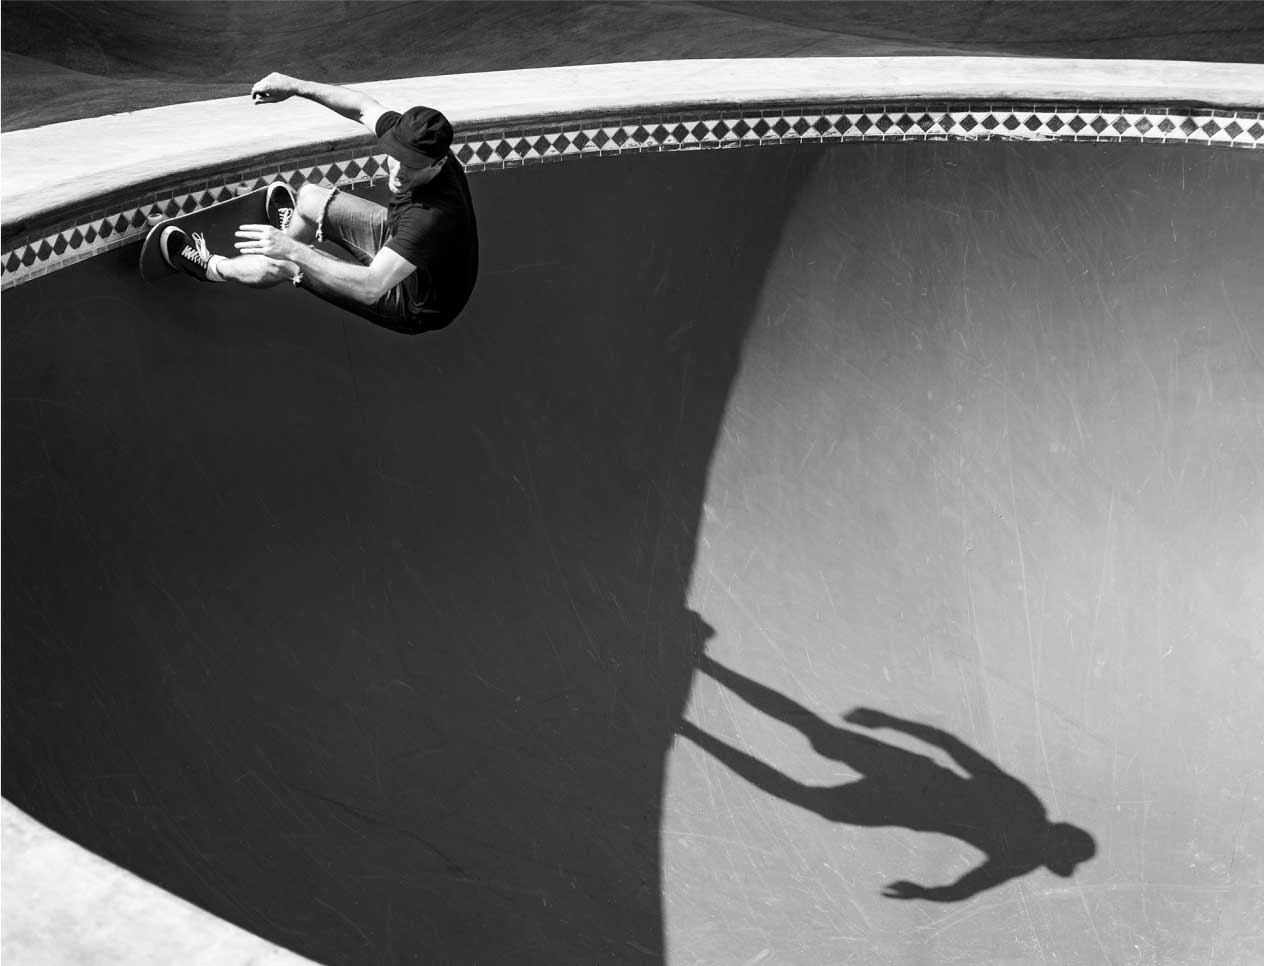 Image of person skateboarding